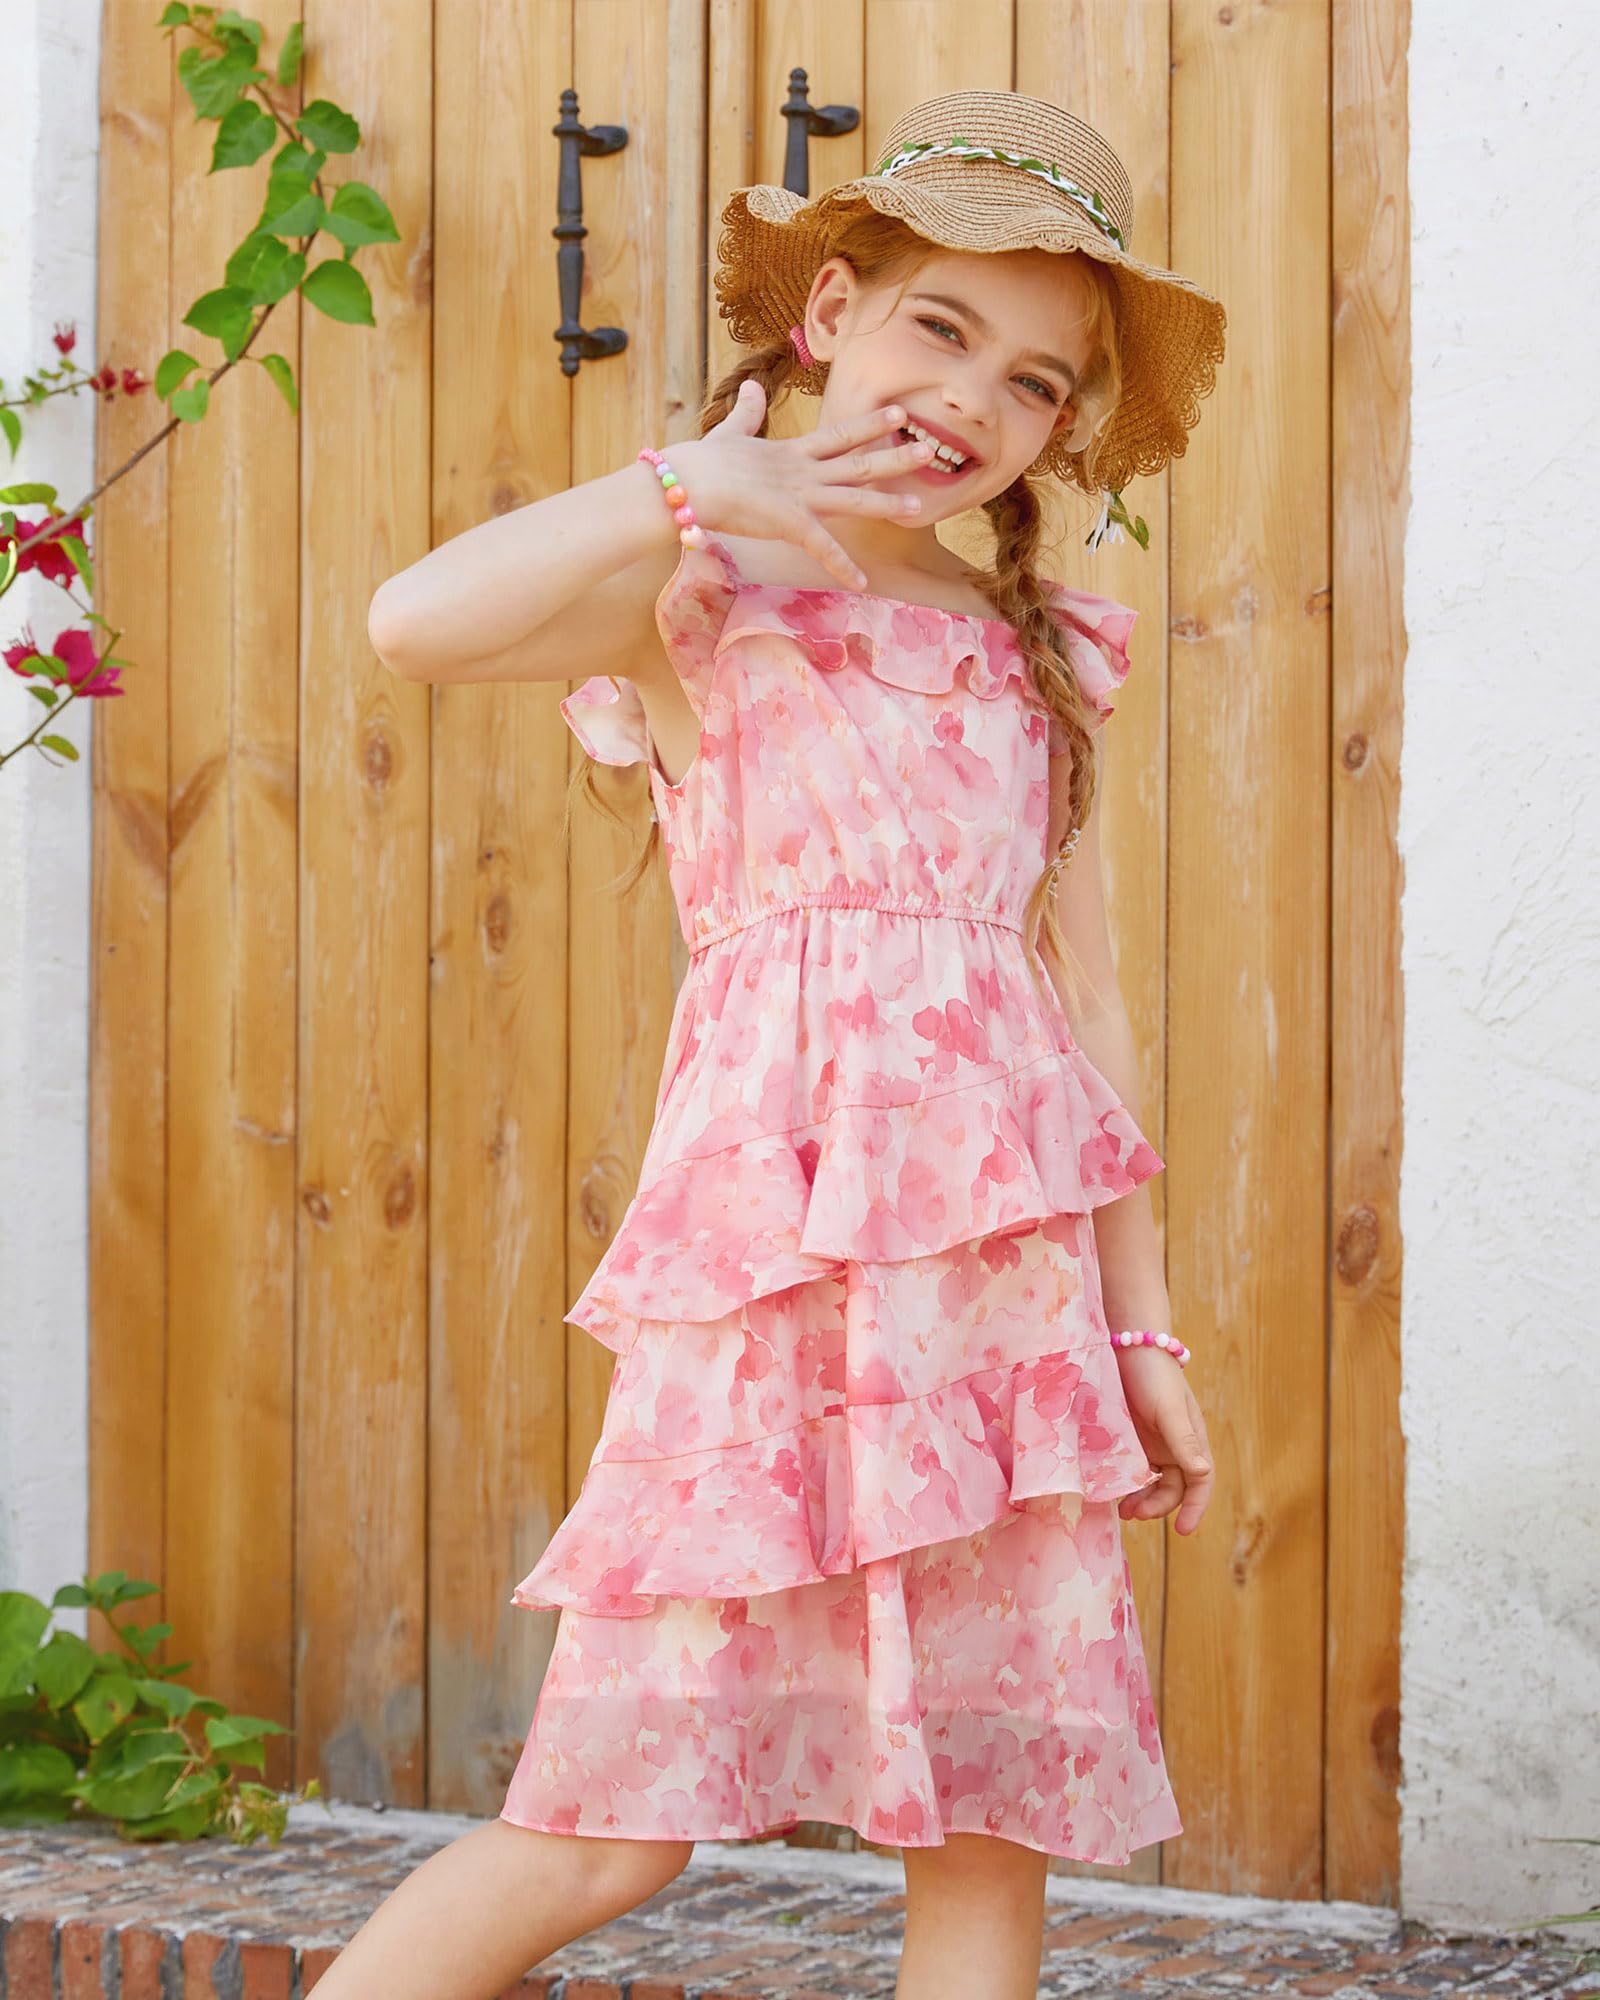 GRACE KARIN Pink Dress for Girls Floral Midi Summer Dress Kids Casual Party Sundresses Ruffle Tunic 7 Years